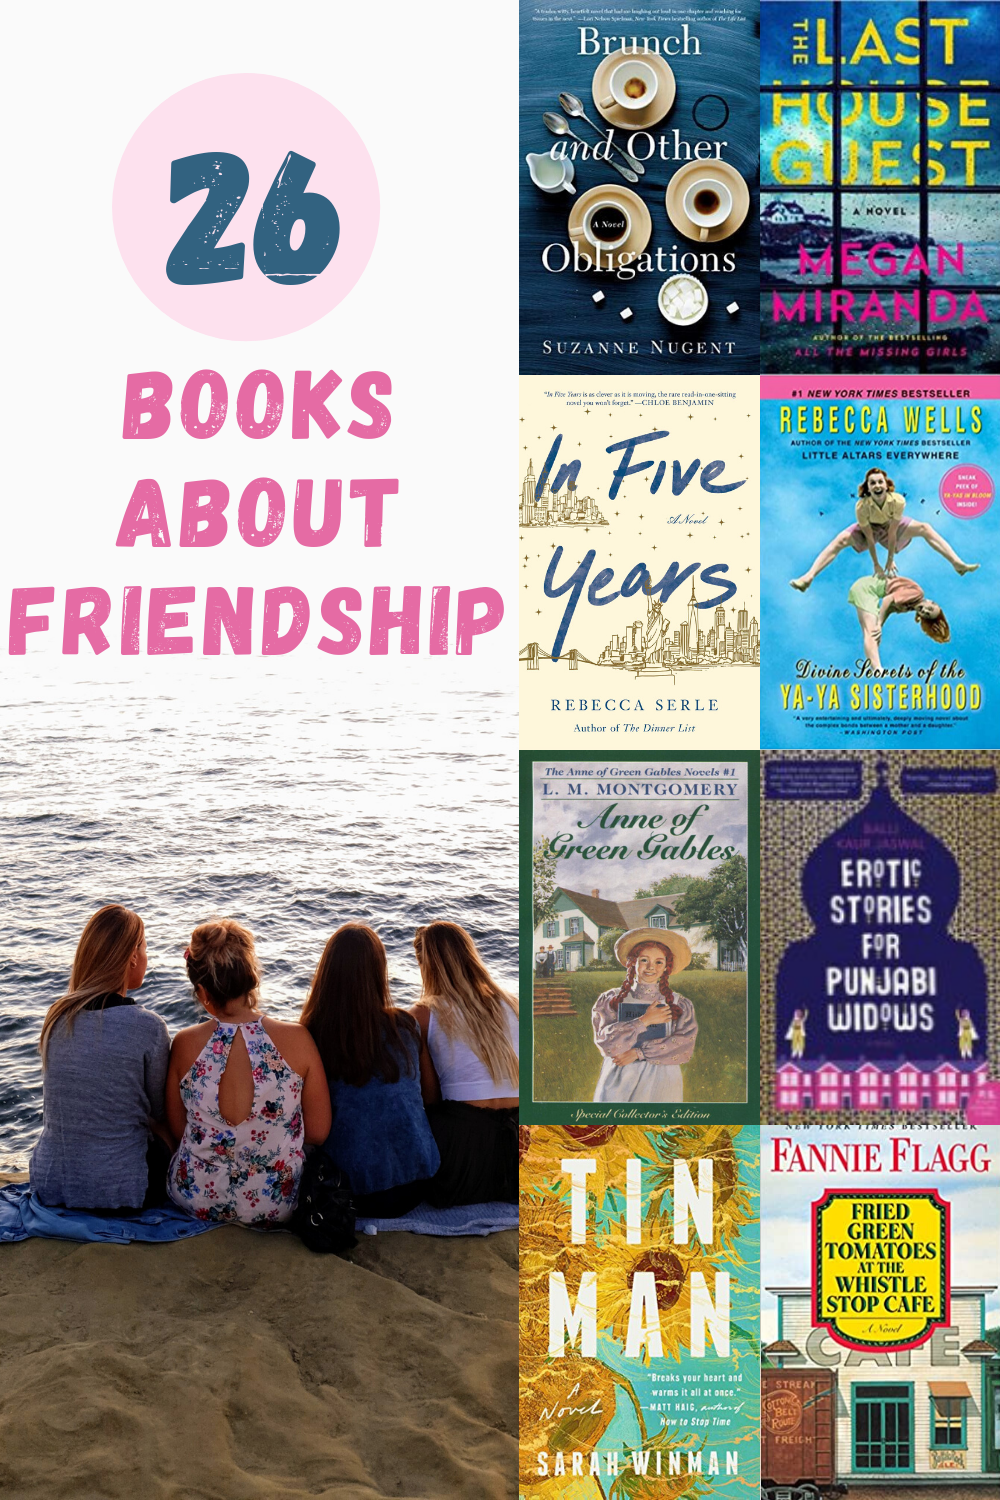 26 incredible books about friendship. Perfect to choose for your next book club. 